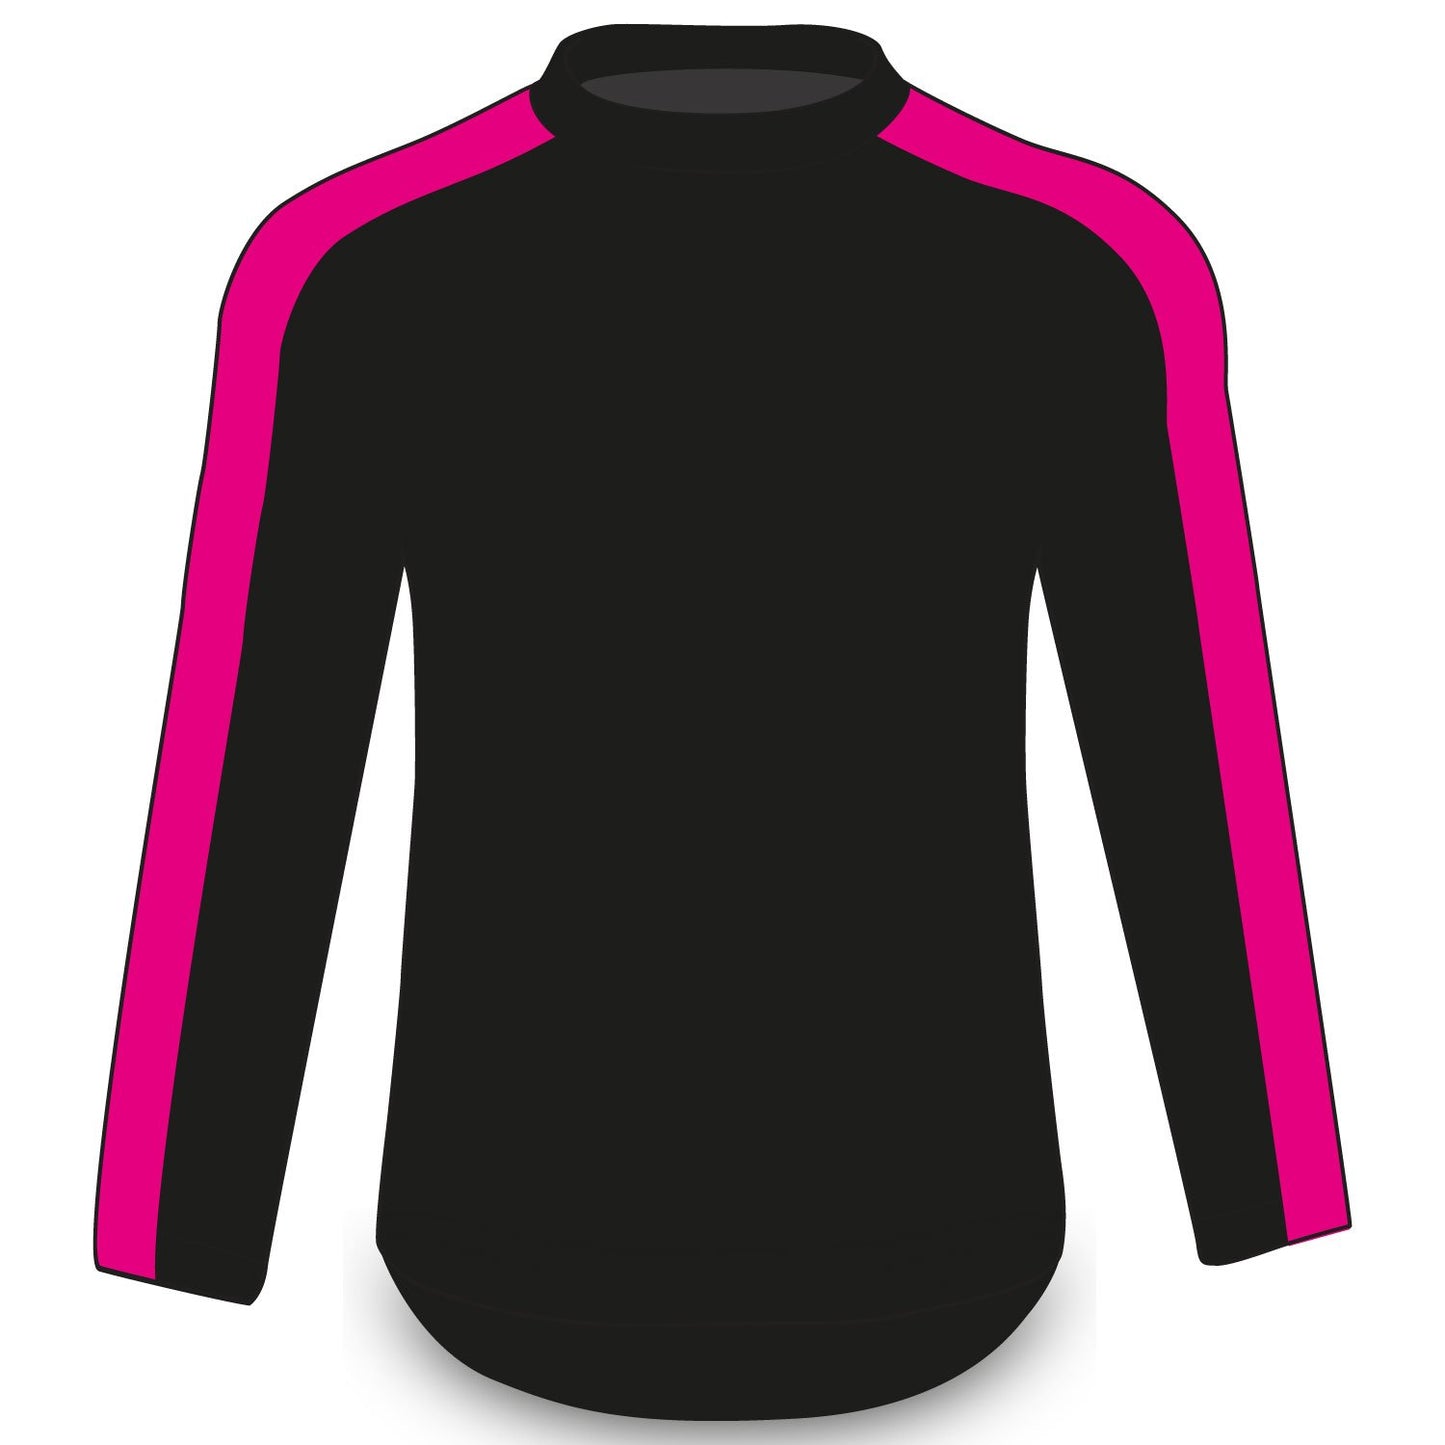 Downing Long Sleeved Tech Top